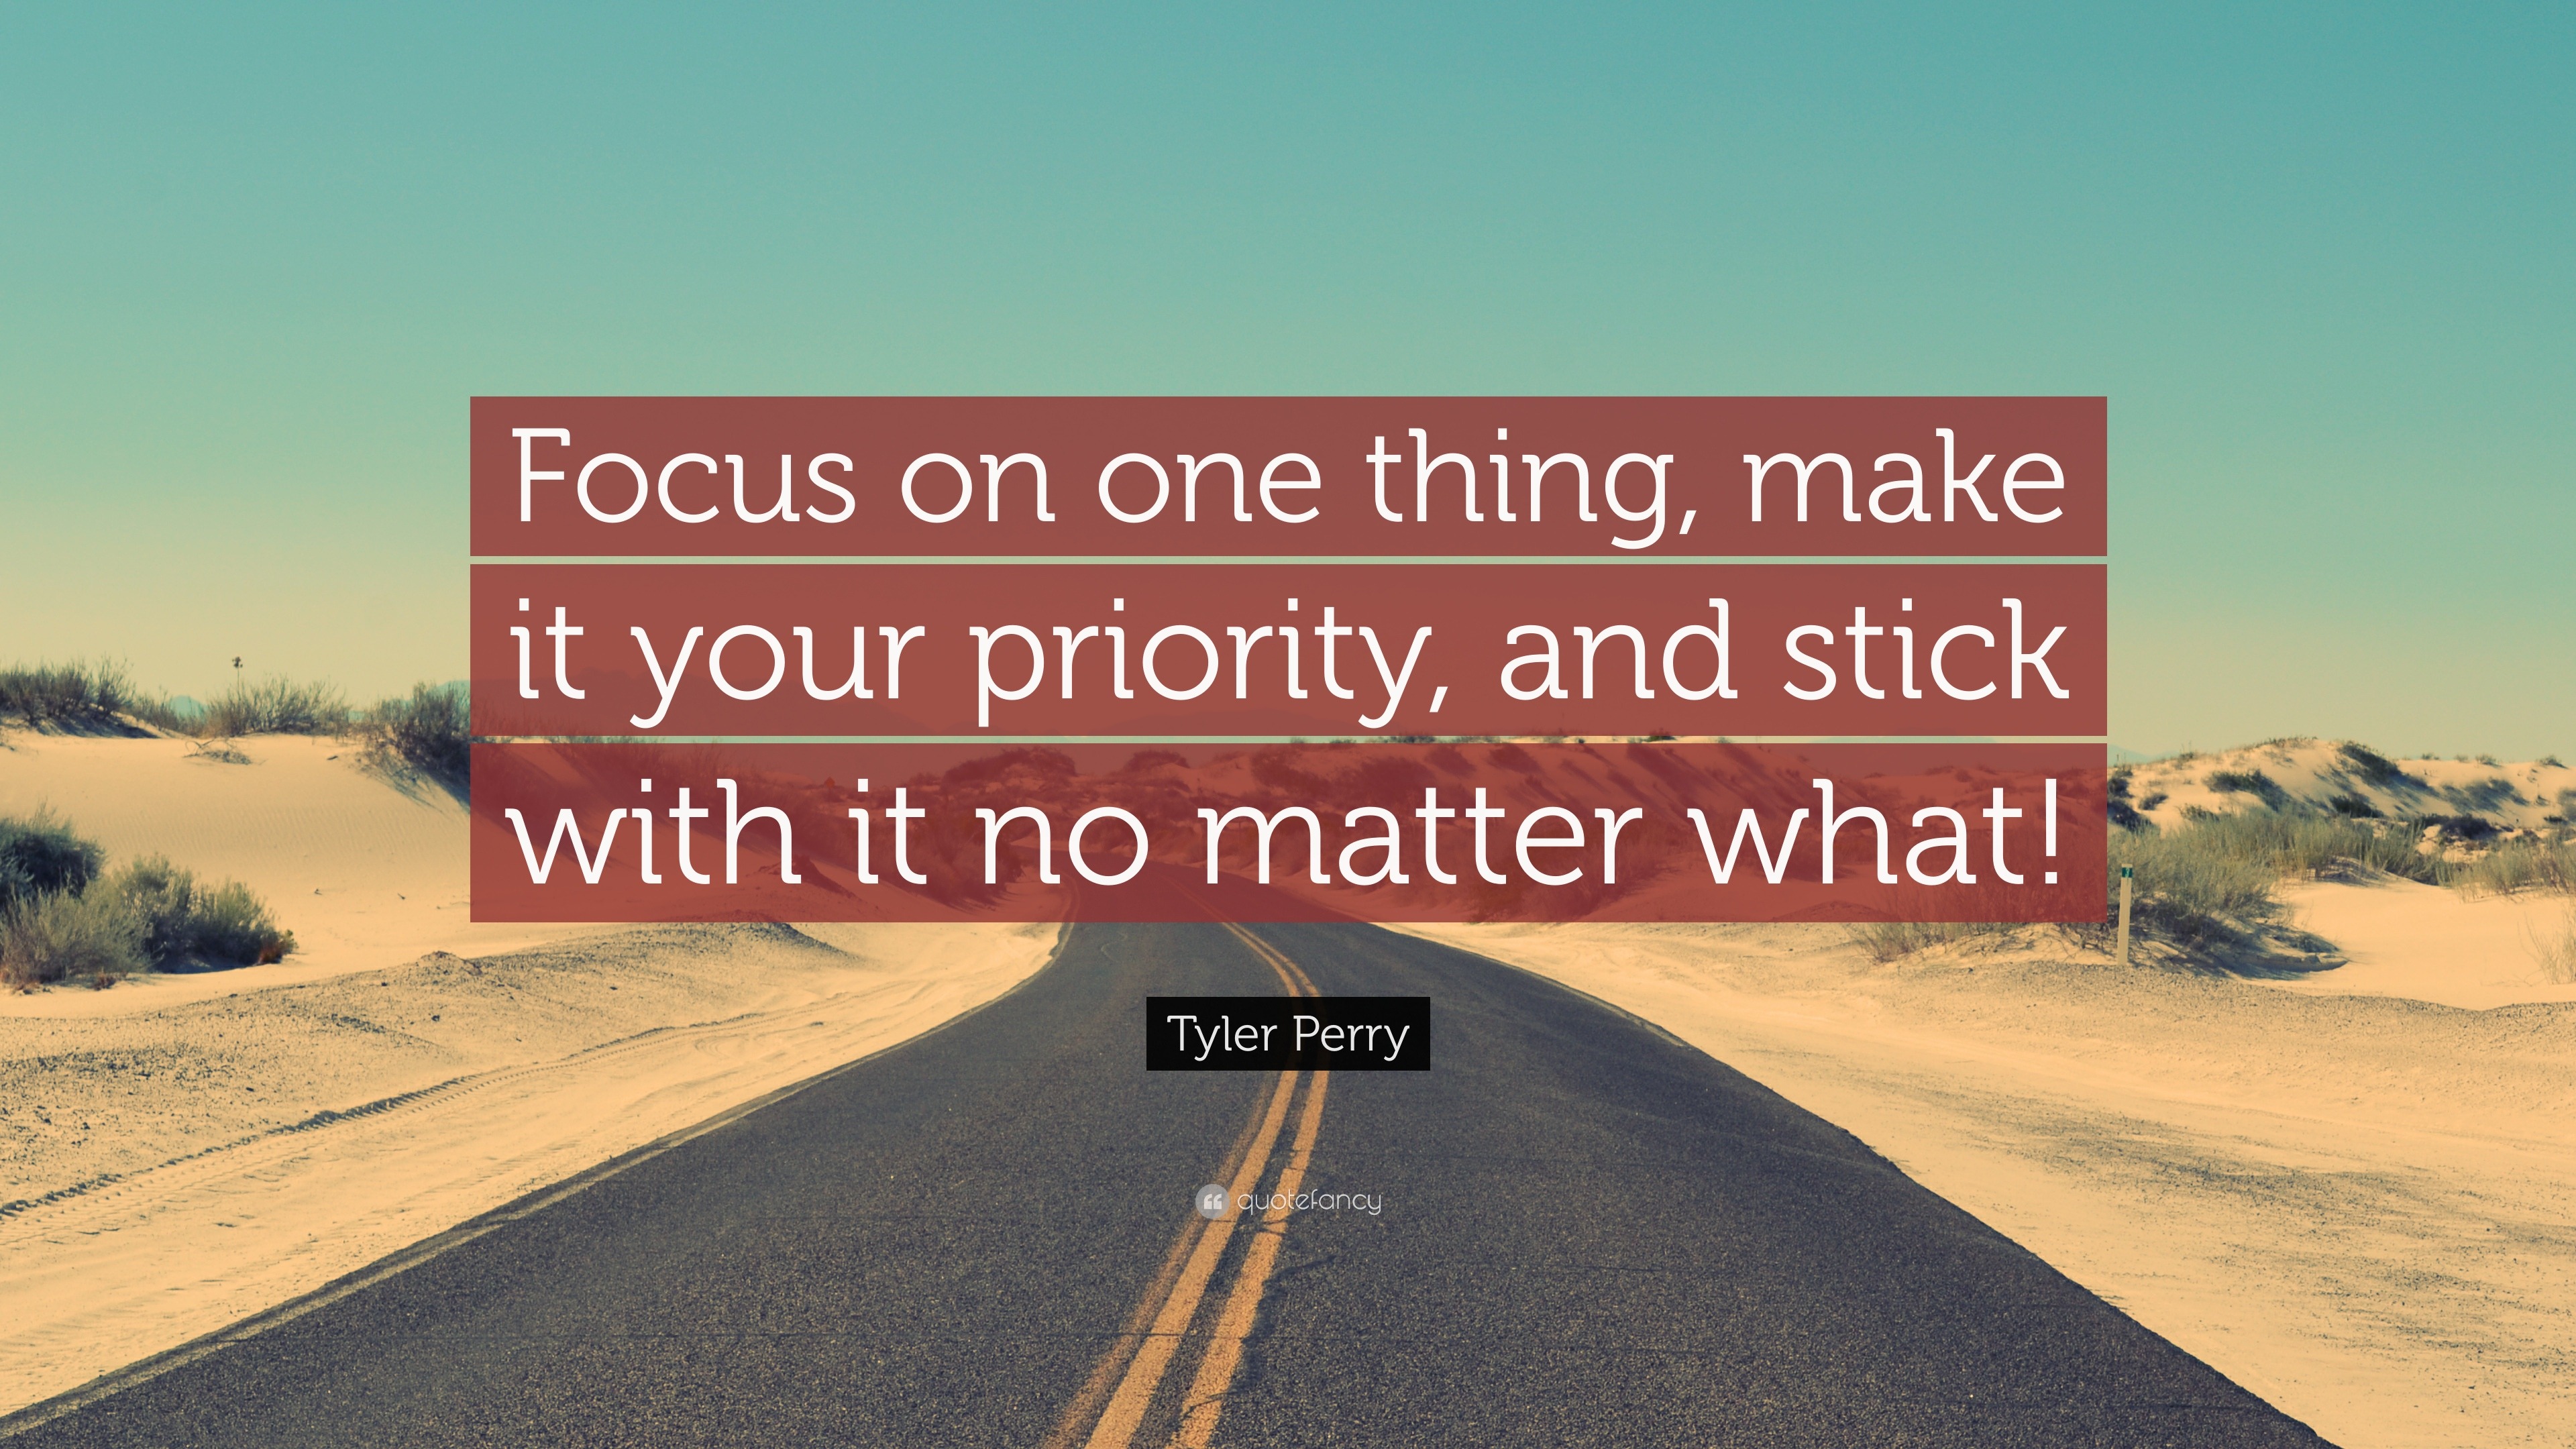 715439 Tyler Perry Quote Focus on one thing make it your priority and